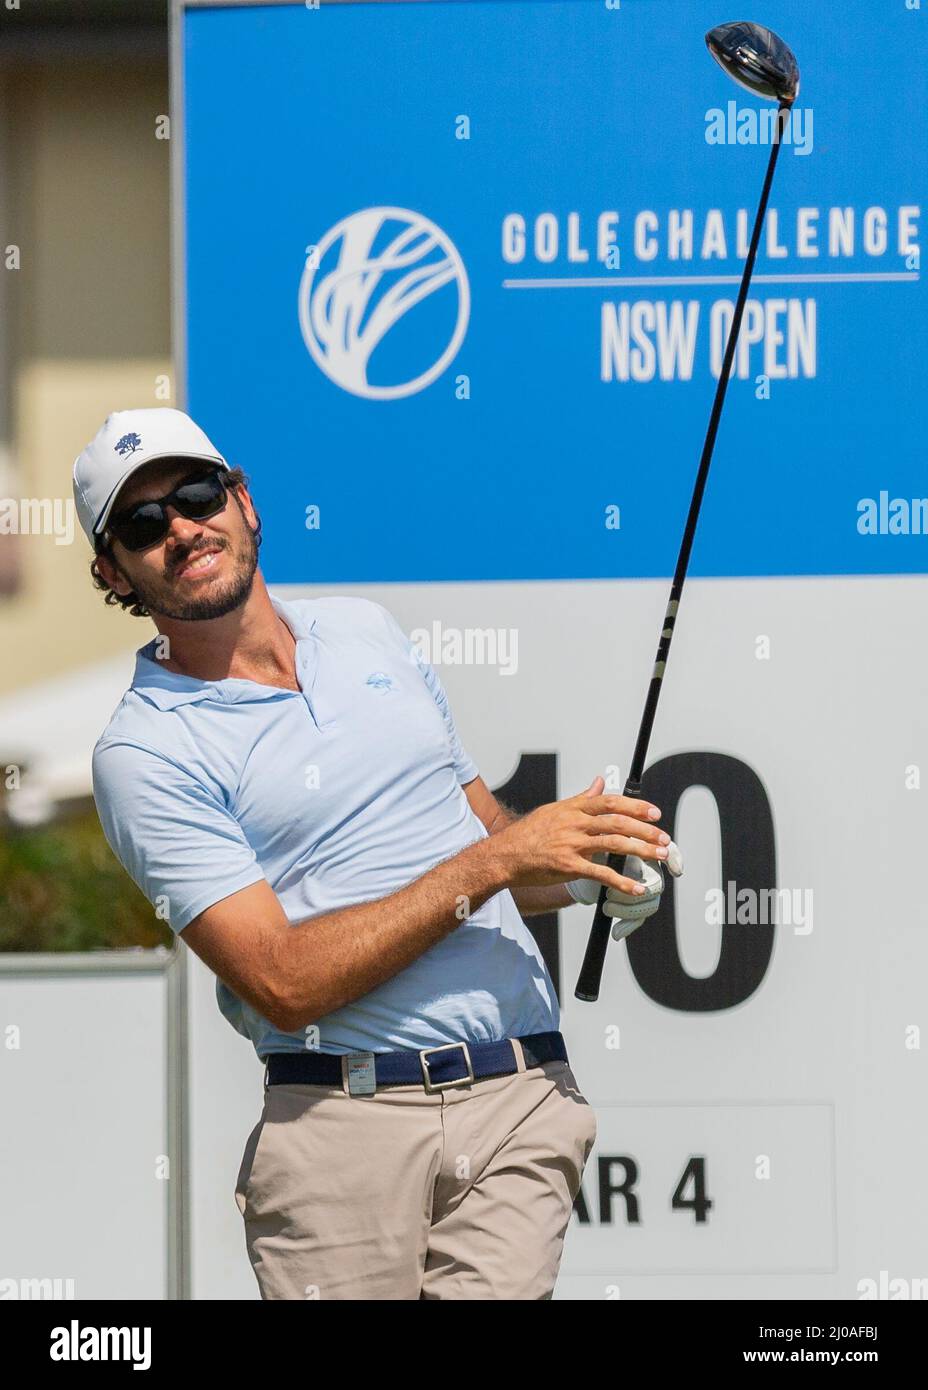 Sydney, Australia. 18th Mar, 2022. Matt Jager of Australia plays his tee shot on the 10th hole during the Round 2 of the 2022 NSW Open at Concord Golf Club on March 18, 2022 in Sydney, Australia. ( Editorial use only) Credit: Izhar Ahmed Khan/Alamy Live News/Alamy Live News Stock Photo